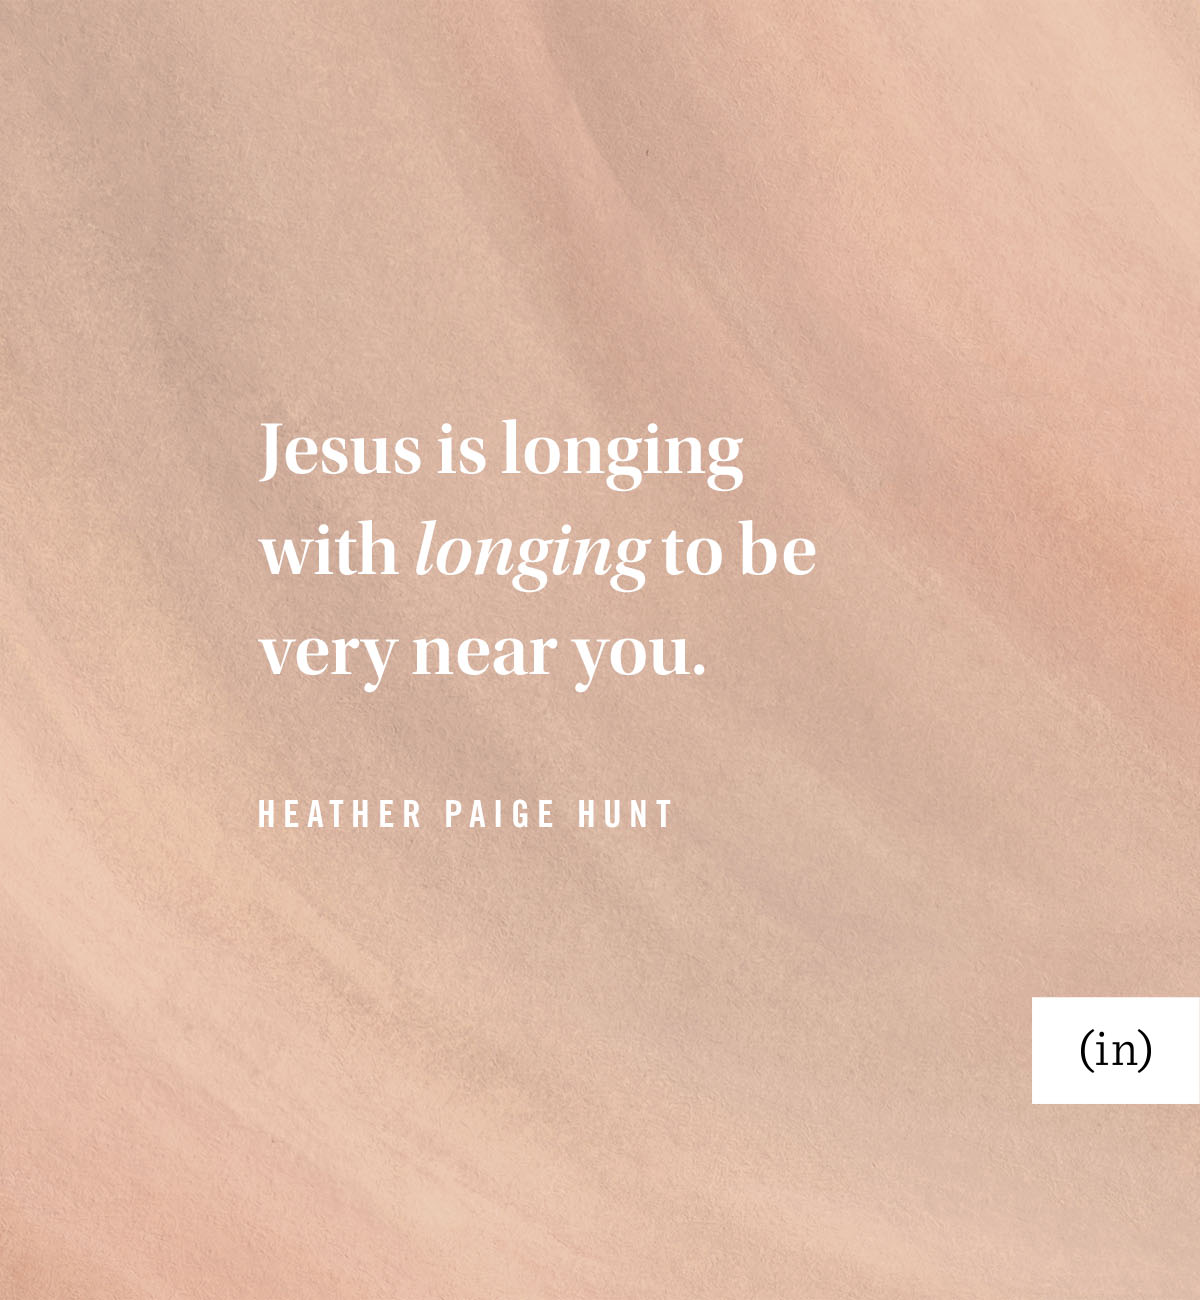 Jesus is longing with longing to be very near you. -Heather Paige Hunt